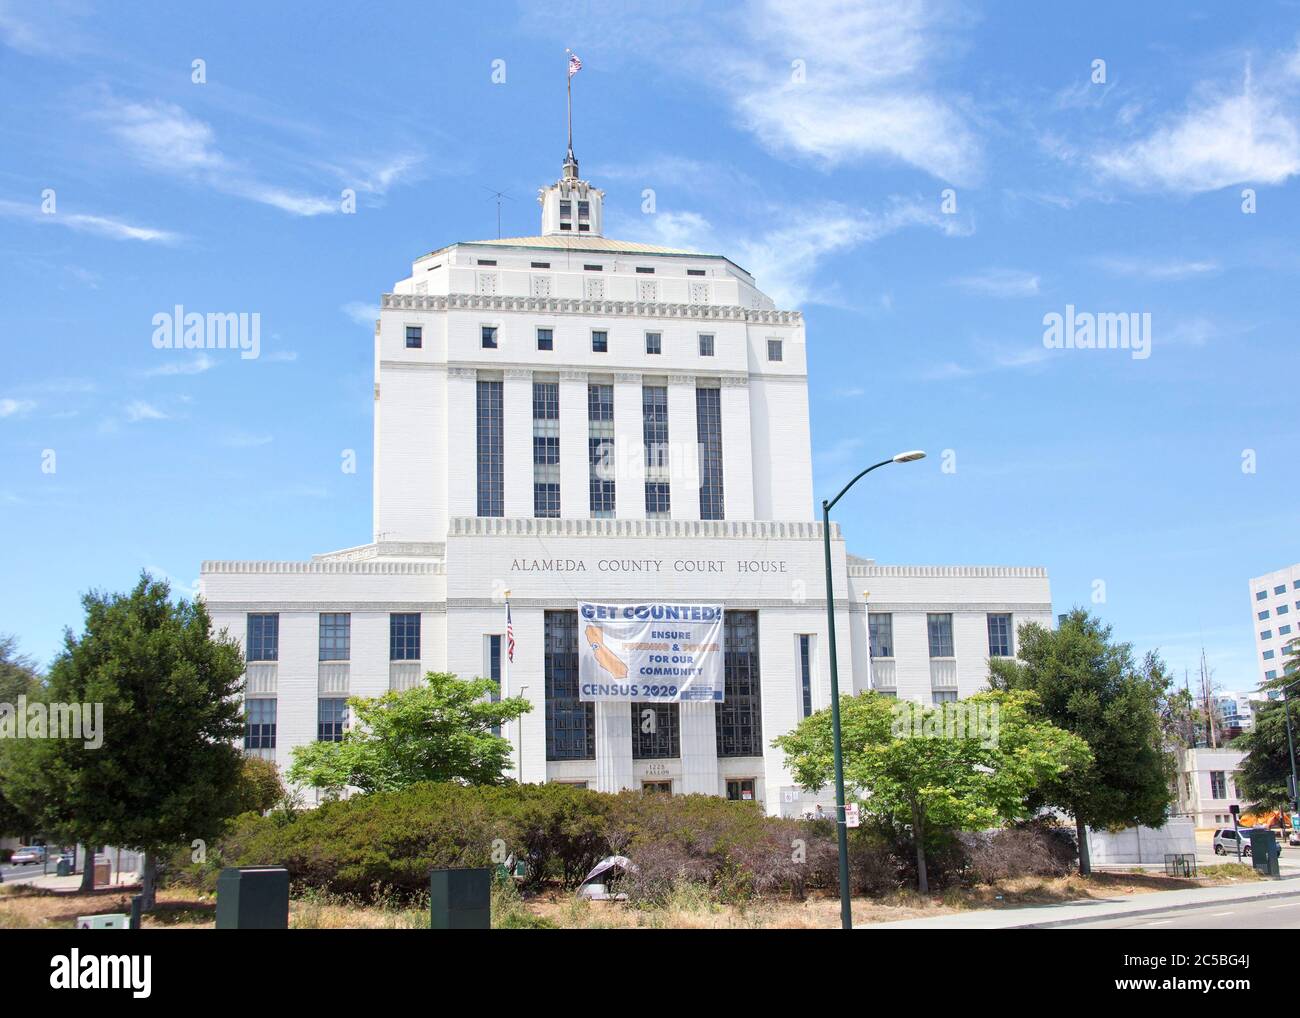 Superior Courthouse High Resolution Stock Photography and Images ...